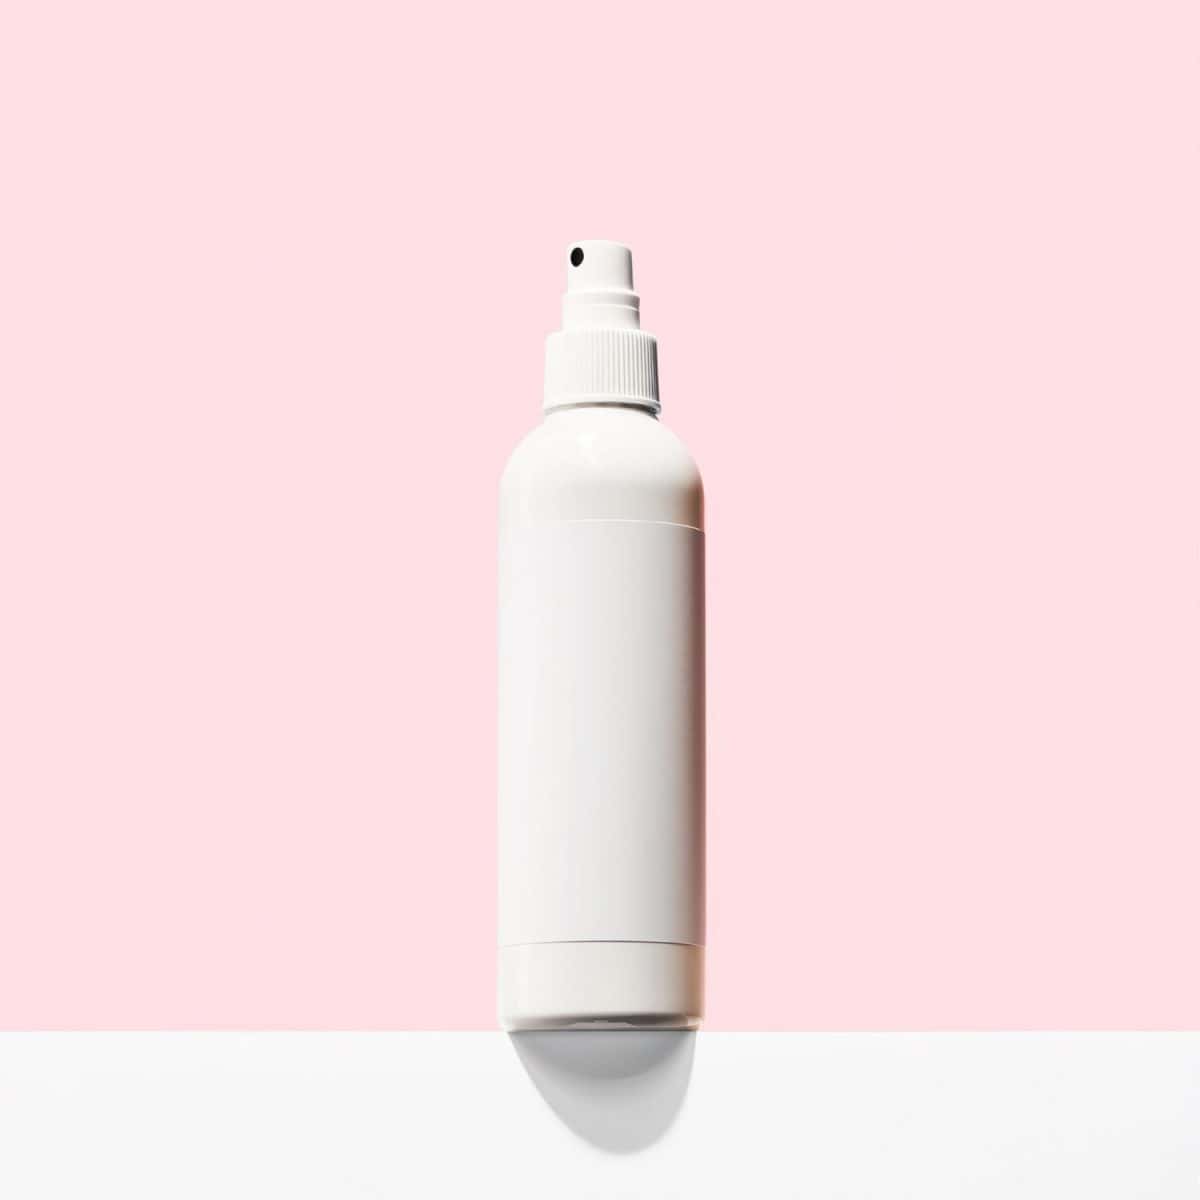 Empty bottle without labels on pink background. Mockup for cosmetic spray bottle, like mineral spray or hairspray. Front view, space for design. White spray bottle for various cosmetic products. Best treatment options for diaper rash